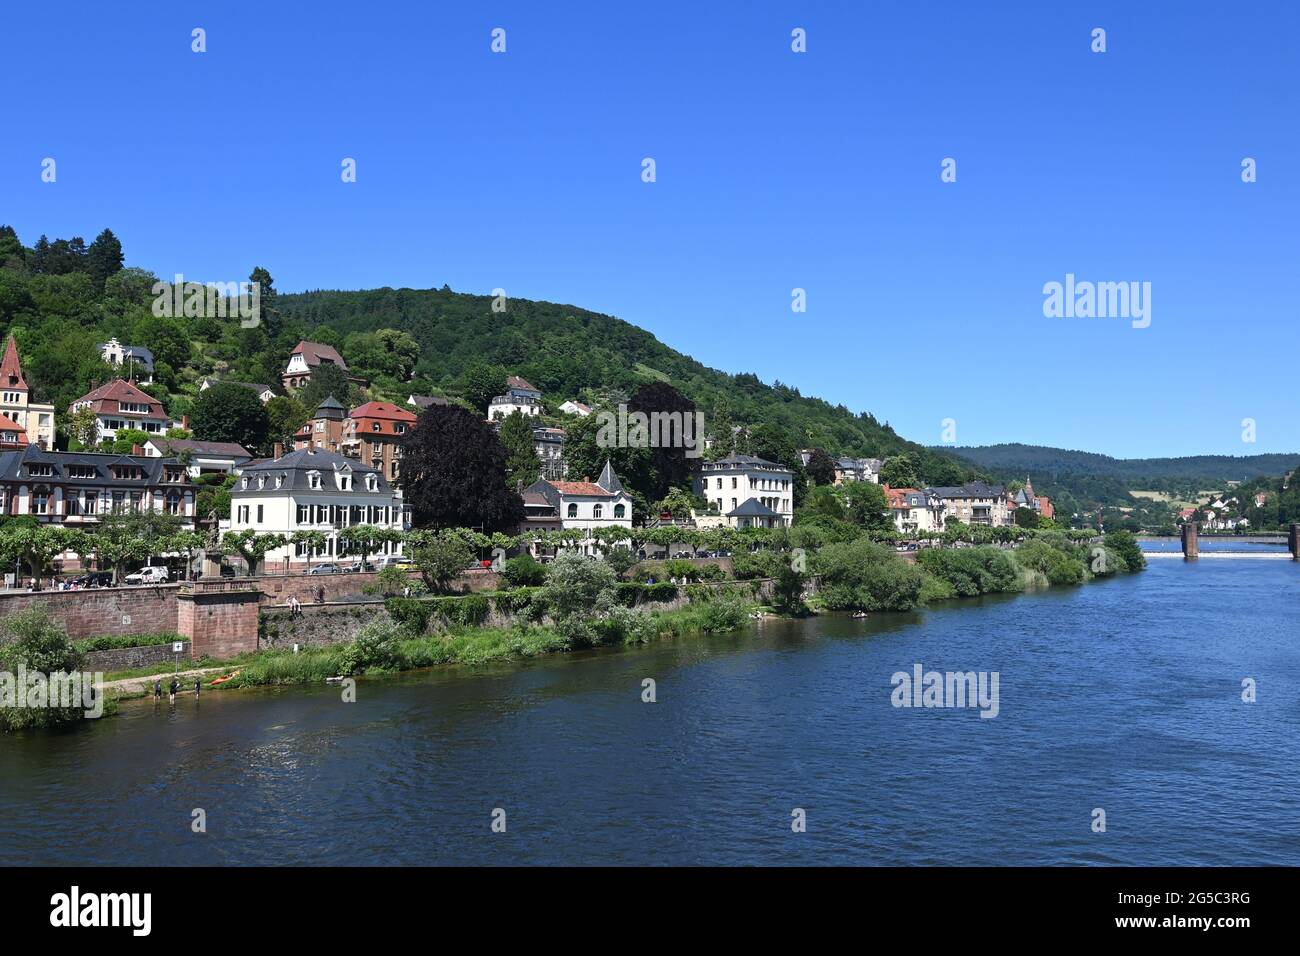 Exclusive residential buildings on the banks of the Neckar river in Heidelberg Stock Photo